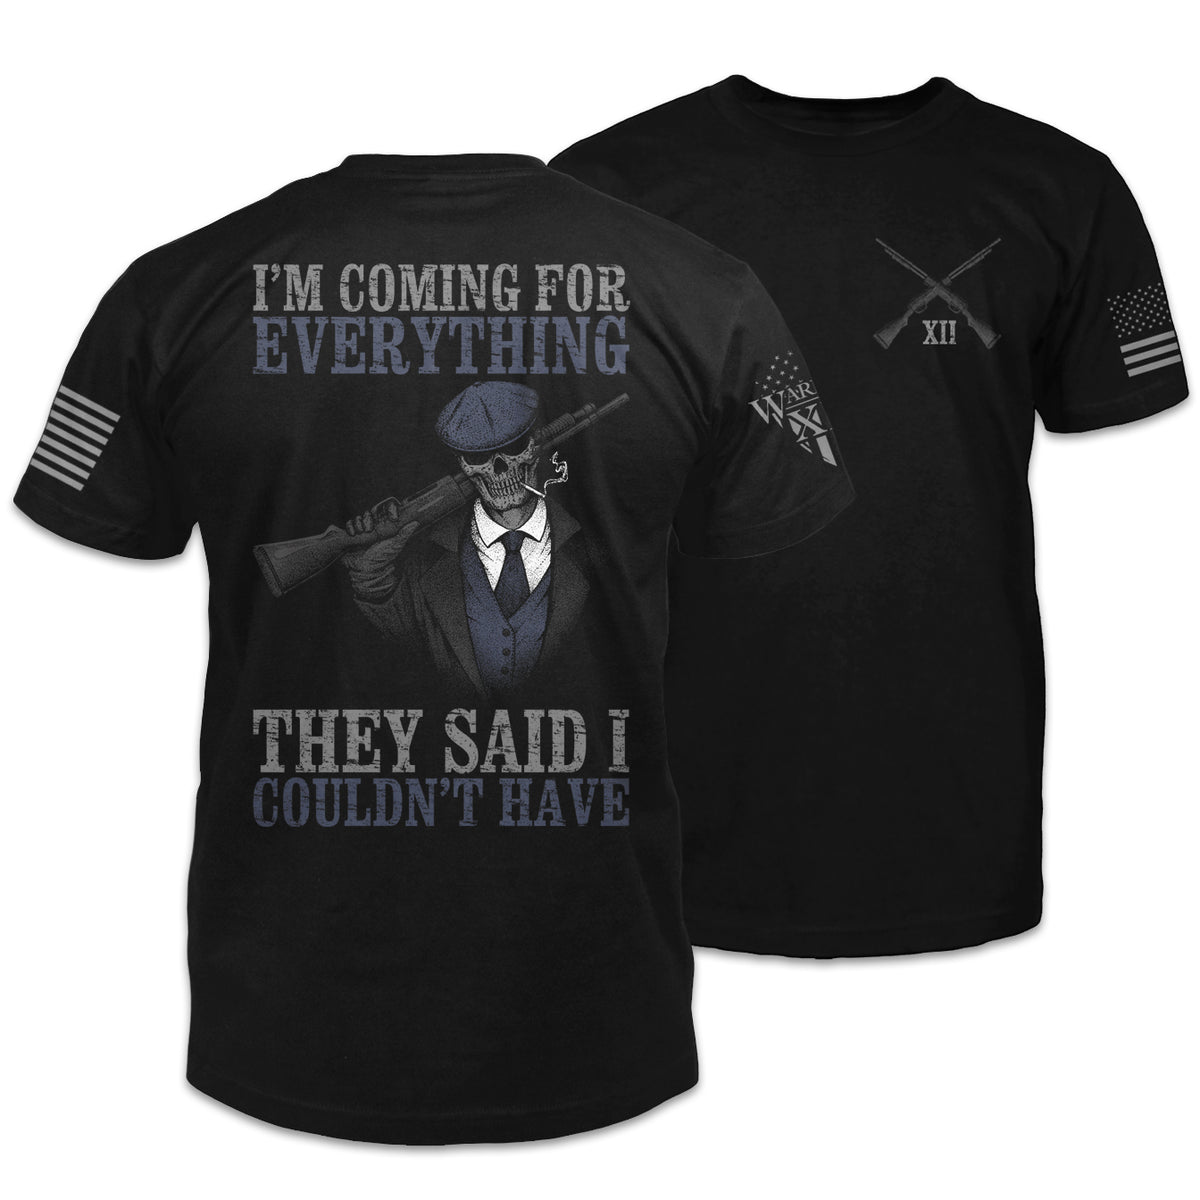 Front & back black t-shirt with the words "I'm coming for everything they said I couldn't have" with a peeky blinders figure holding a gun printed on the back.